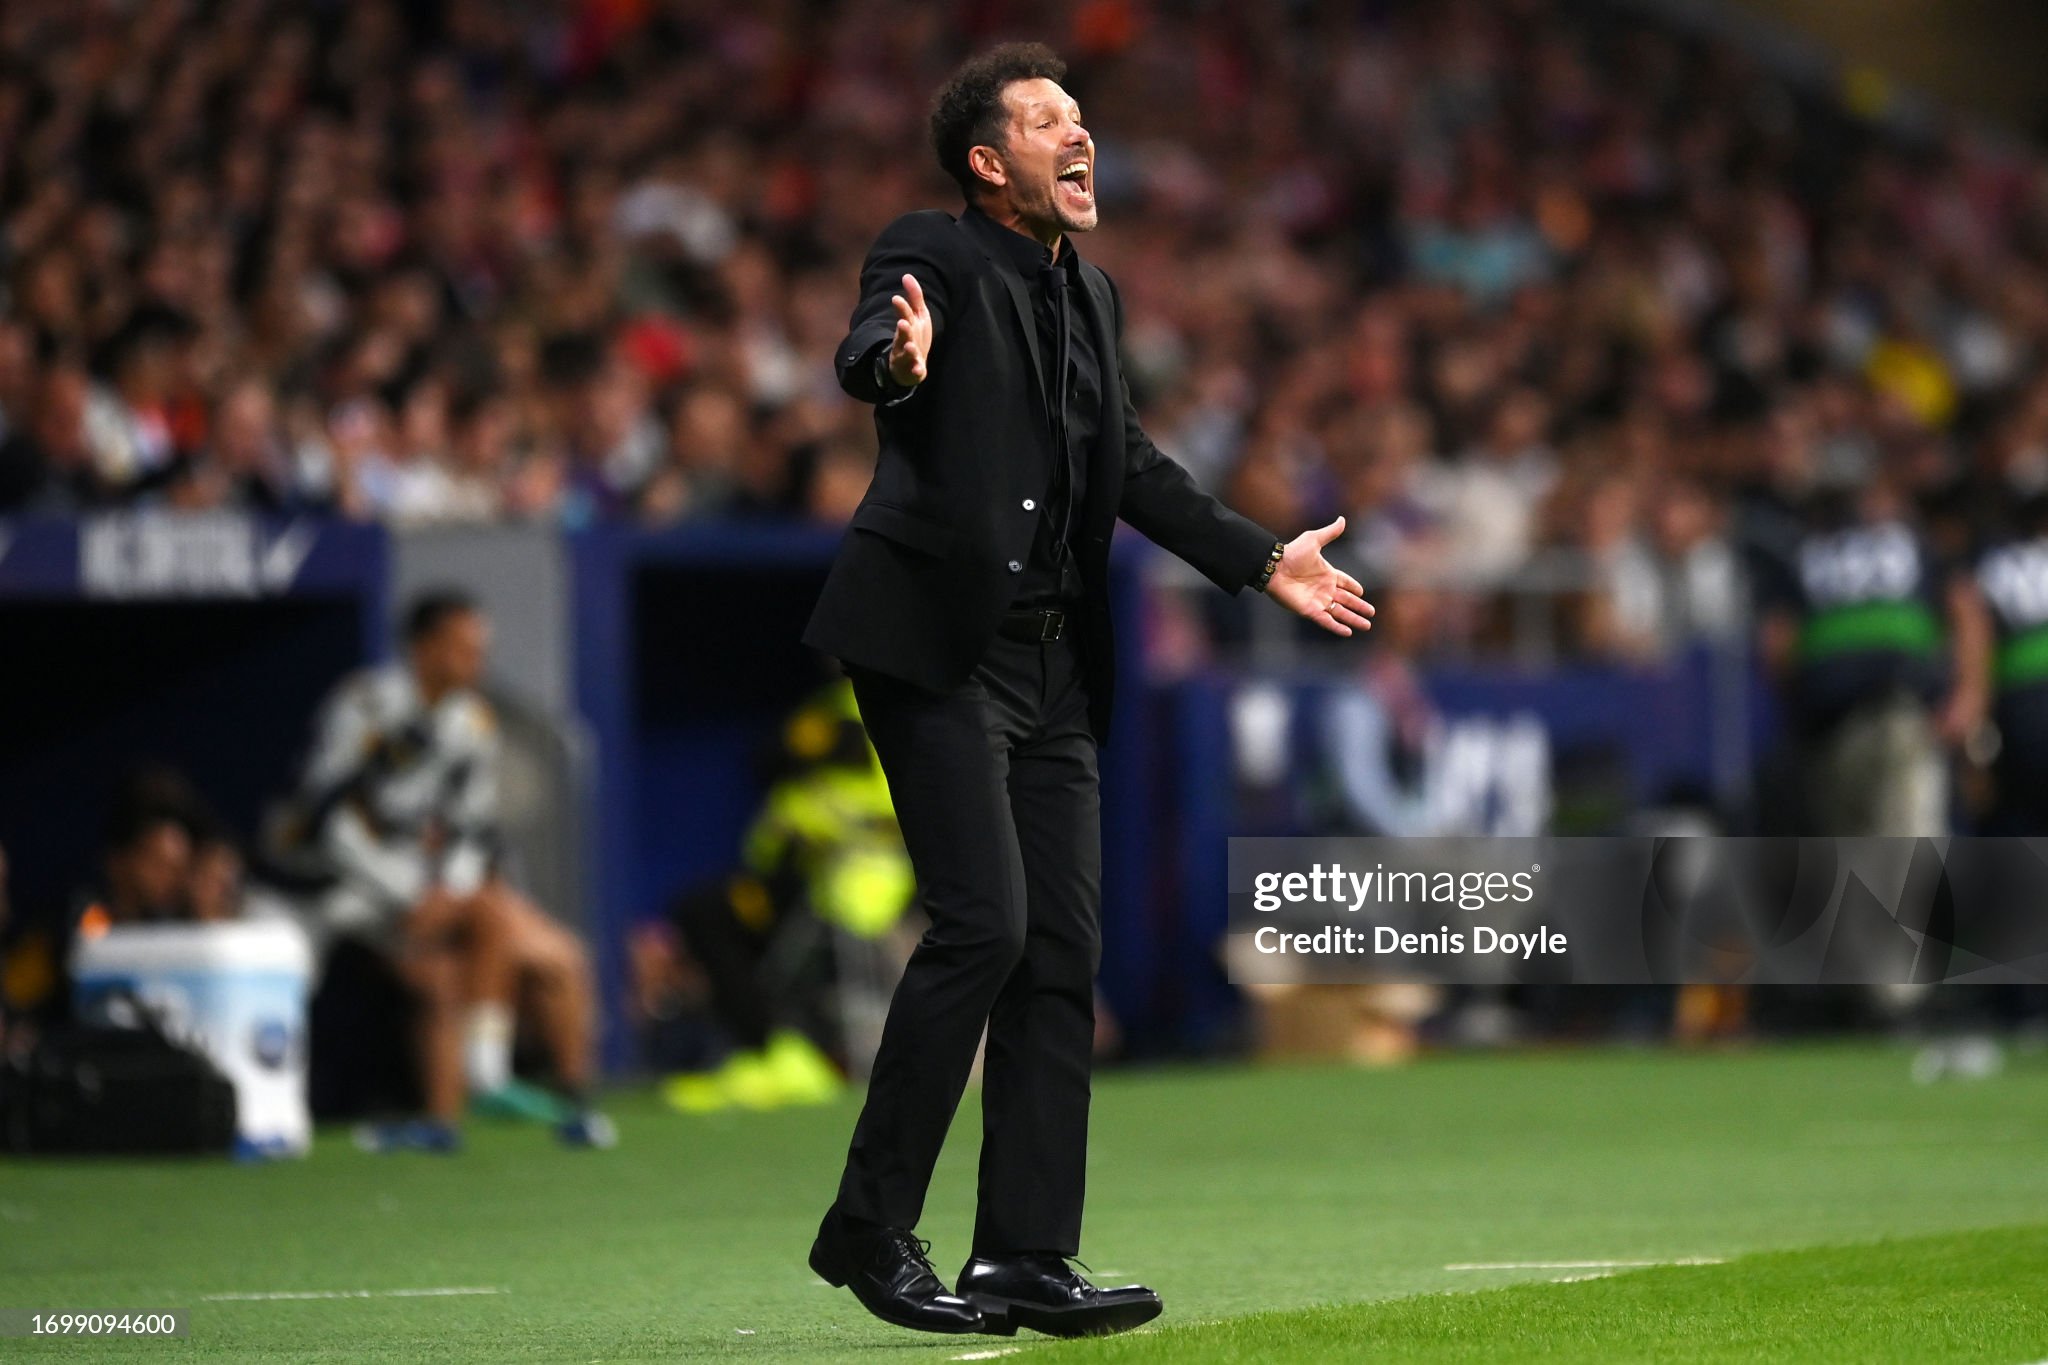 Simeone explains reaction after Bellingham's tackle: 'I thought it was a red card'